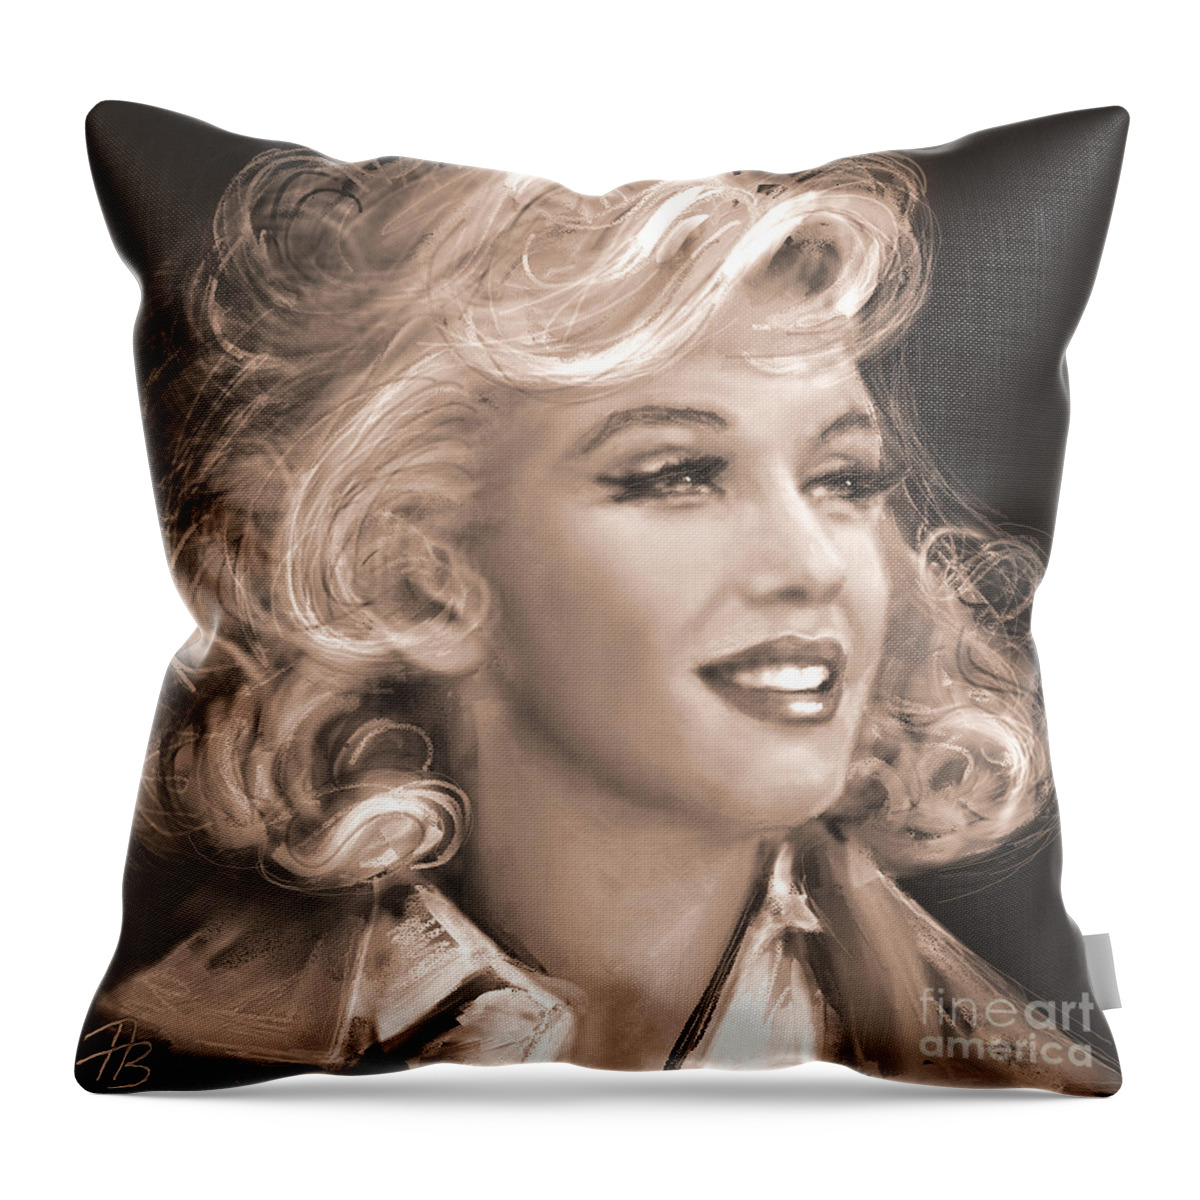 Angie Braun Throw Pillow featuring the painting Marilyn Sepia by Angie Braun